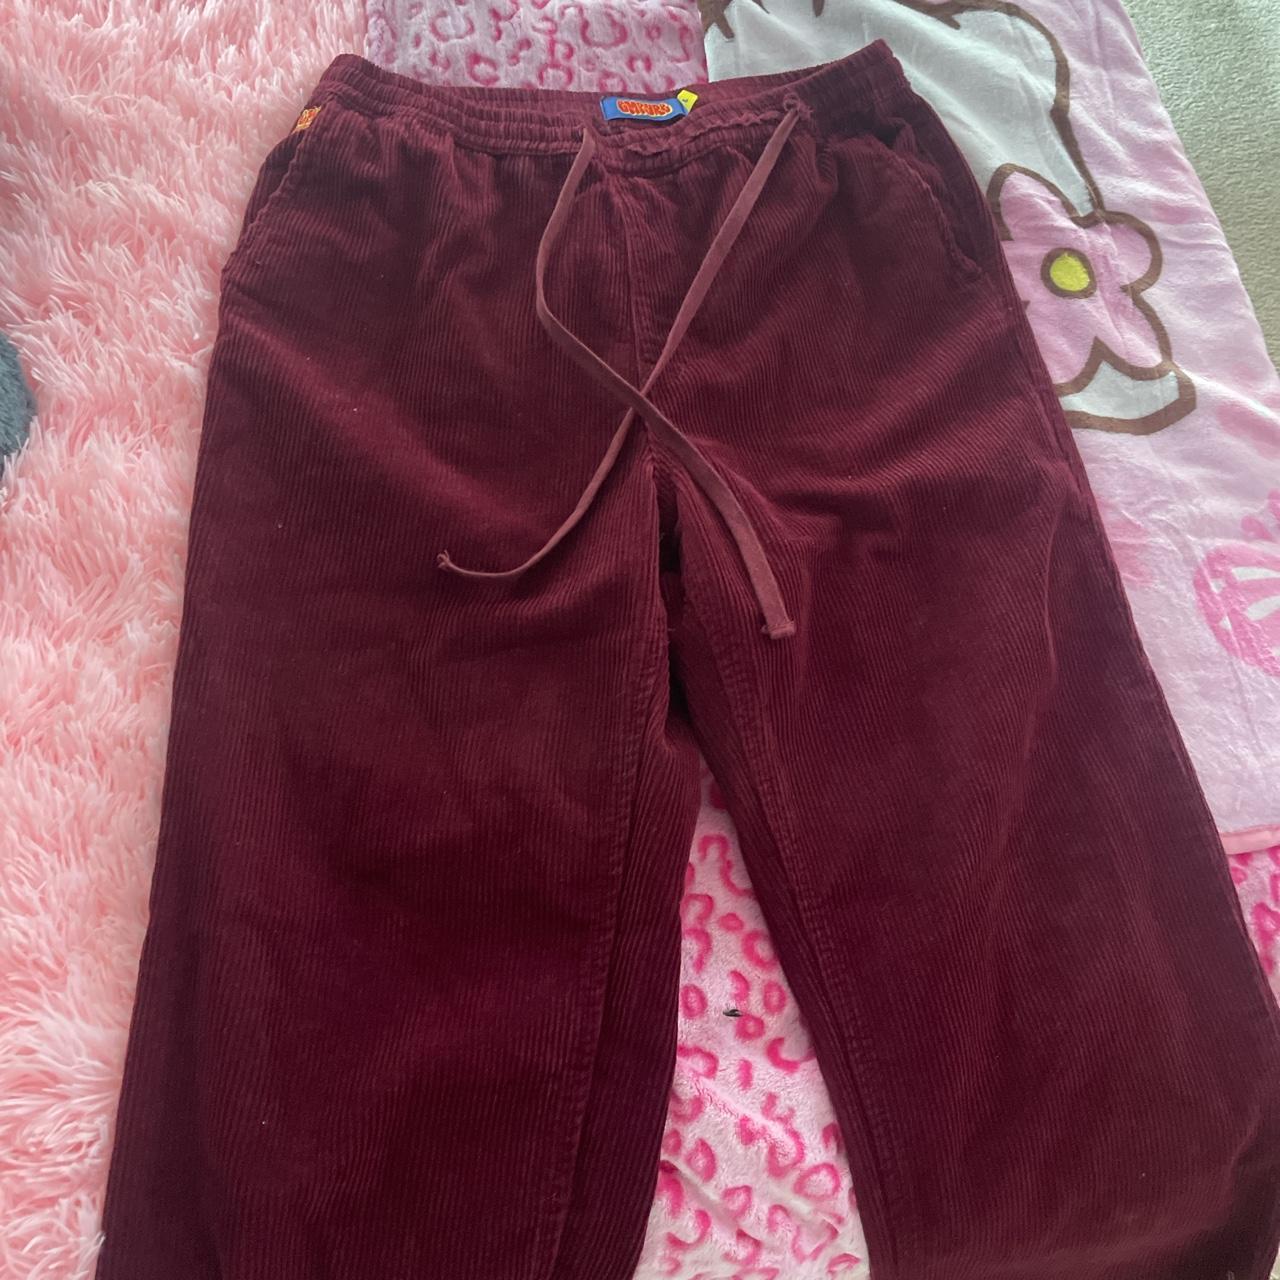 Red Gm pyre pants from Zumies!! #gmpyre #red #pants #L - Depop